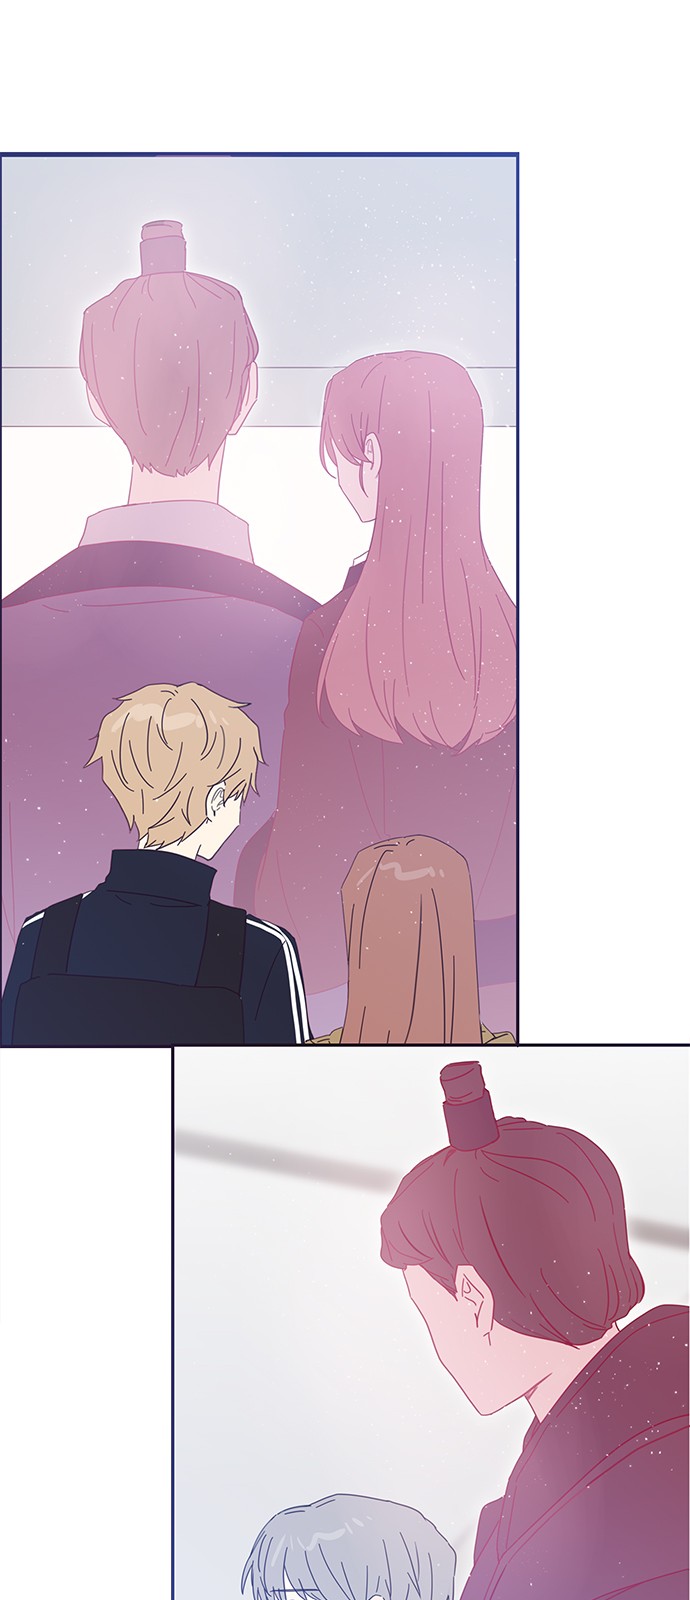 Threads of Love (The Fool of Love and Peace) - Chapter 71 - Page 3